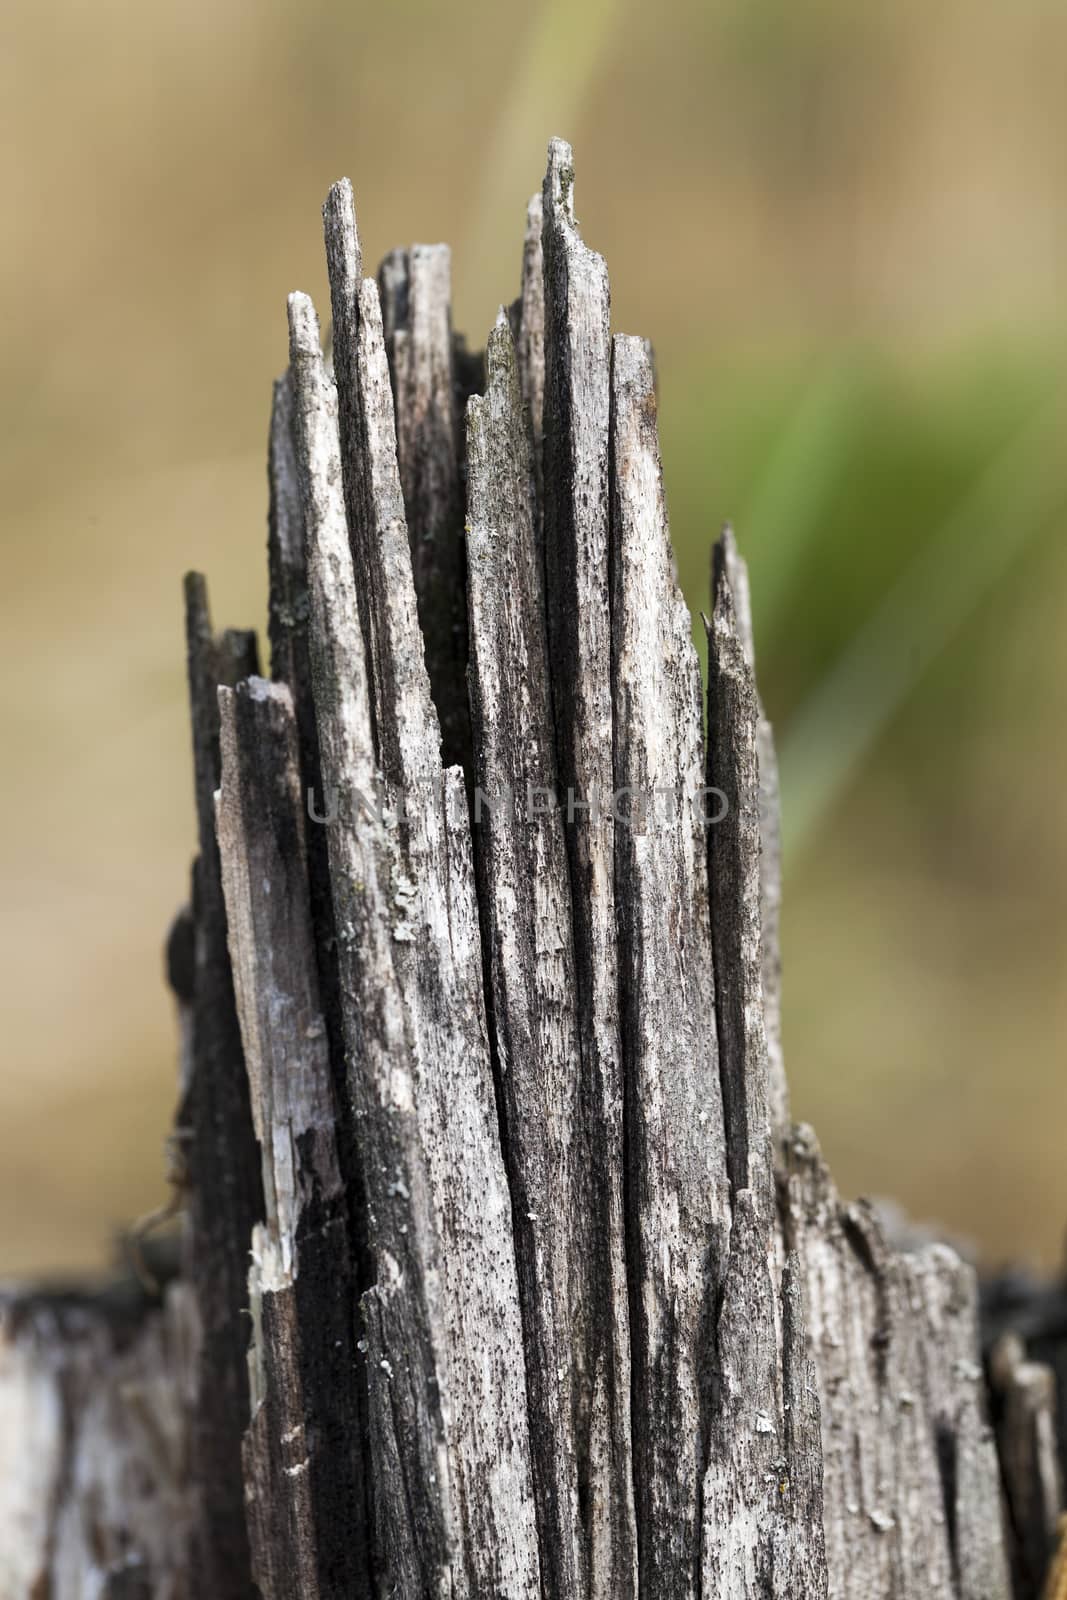  photographed close-up of an old fracture of the tree, a small depth of field